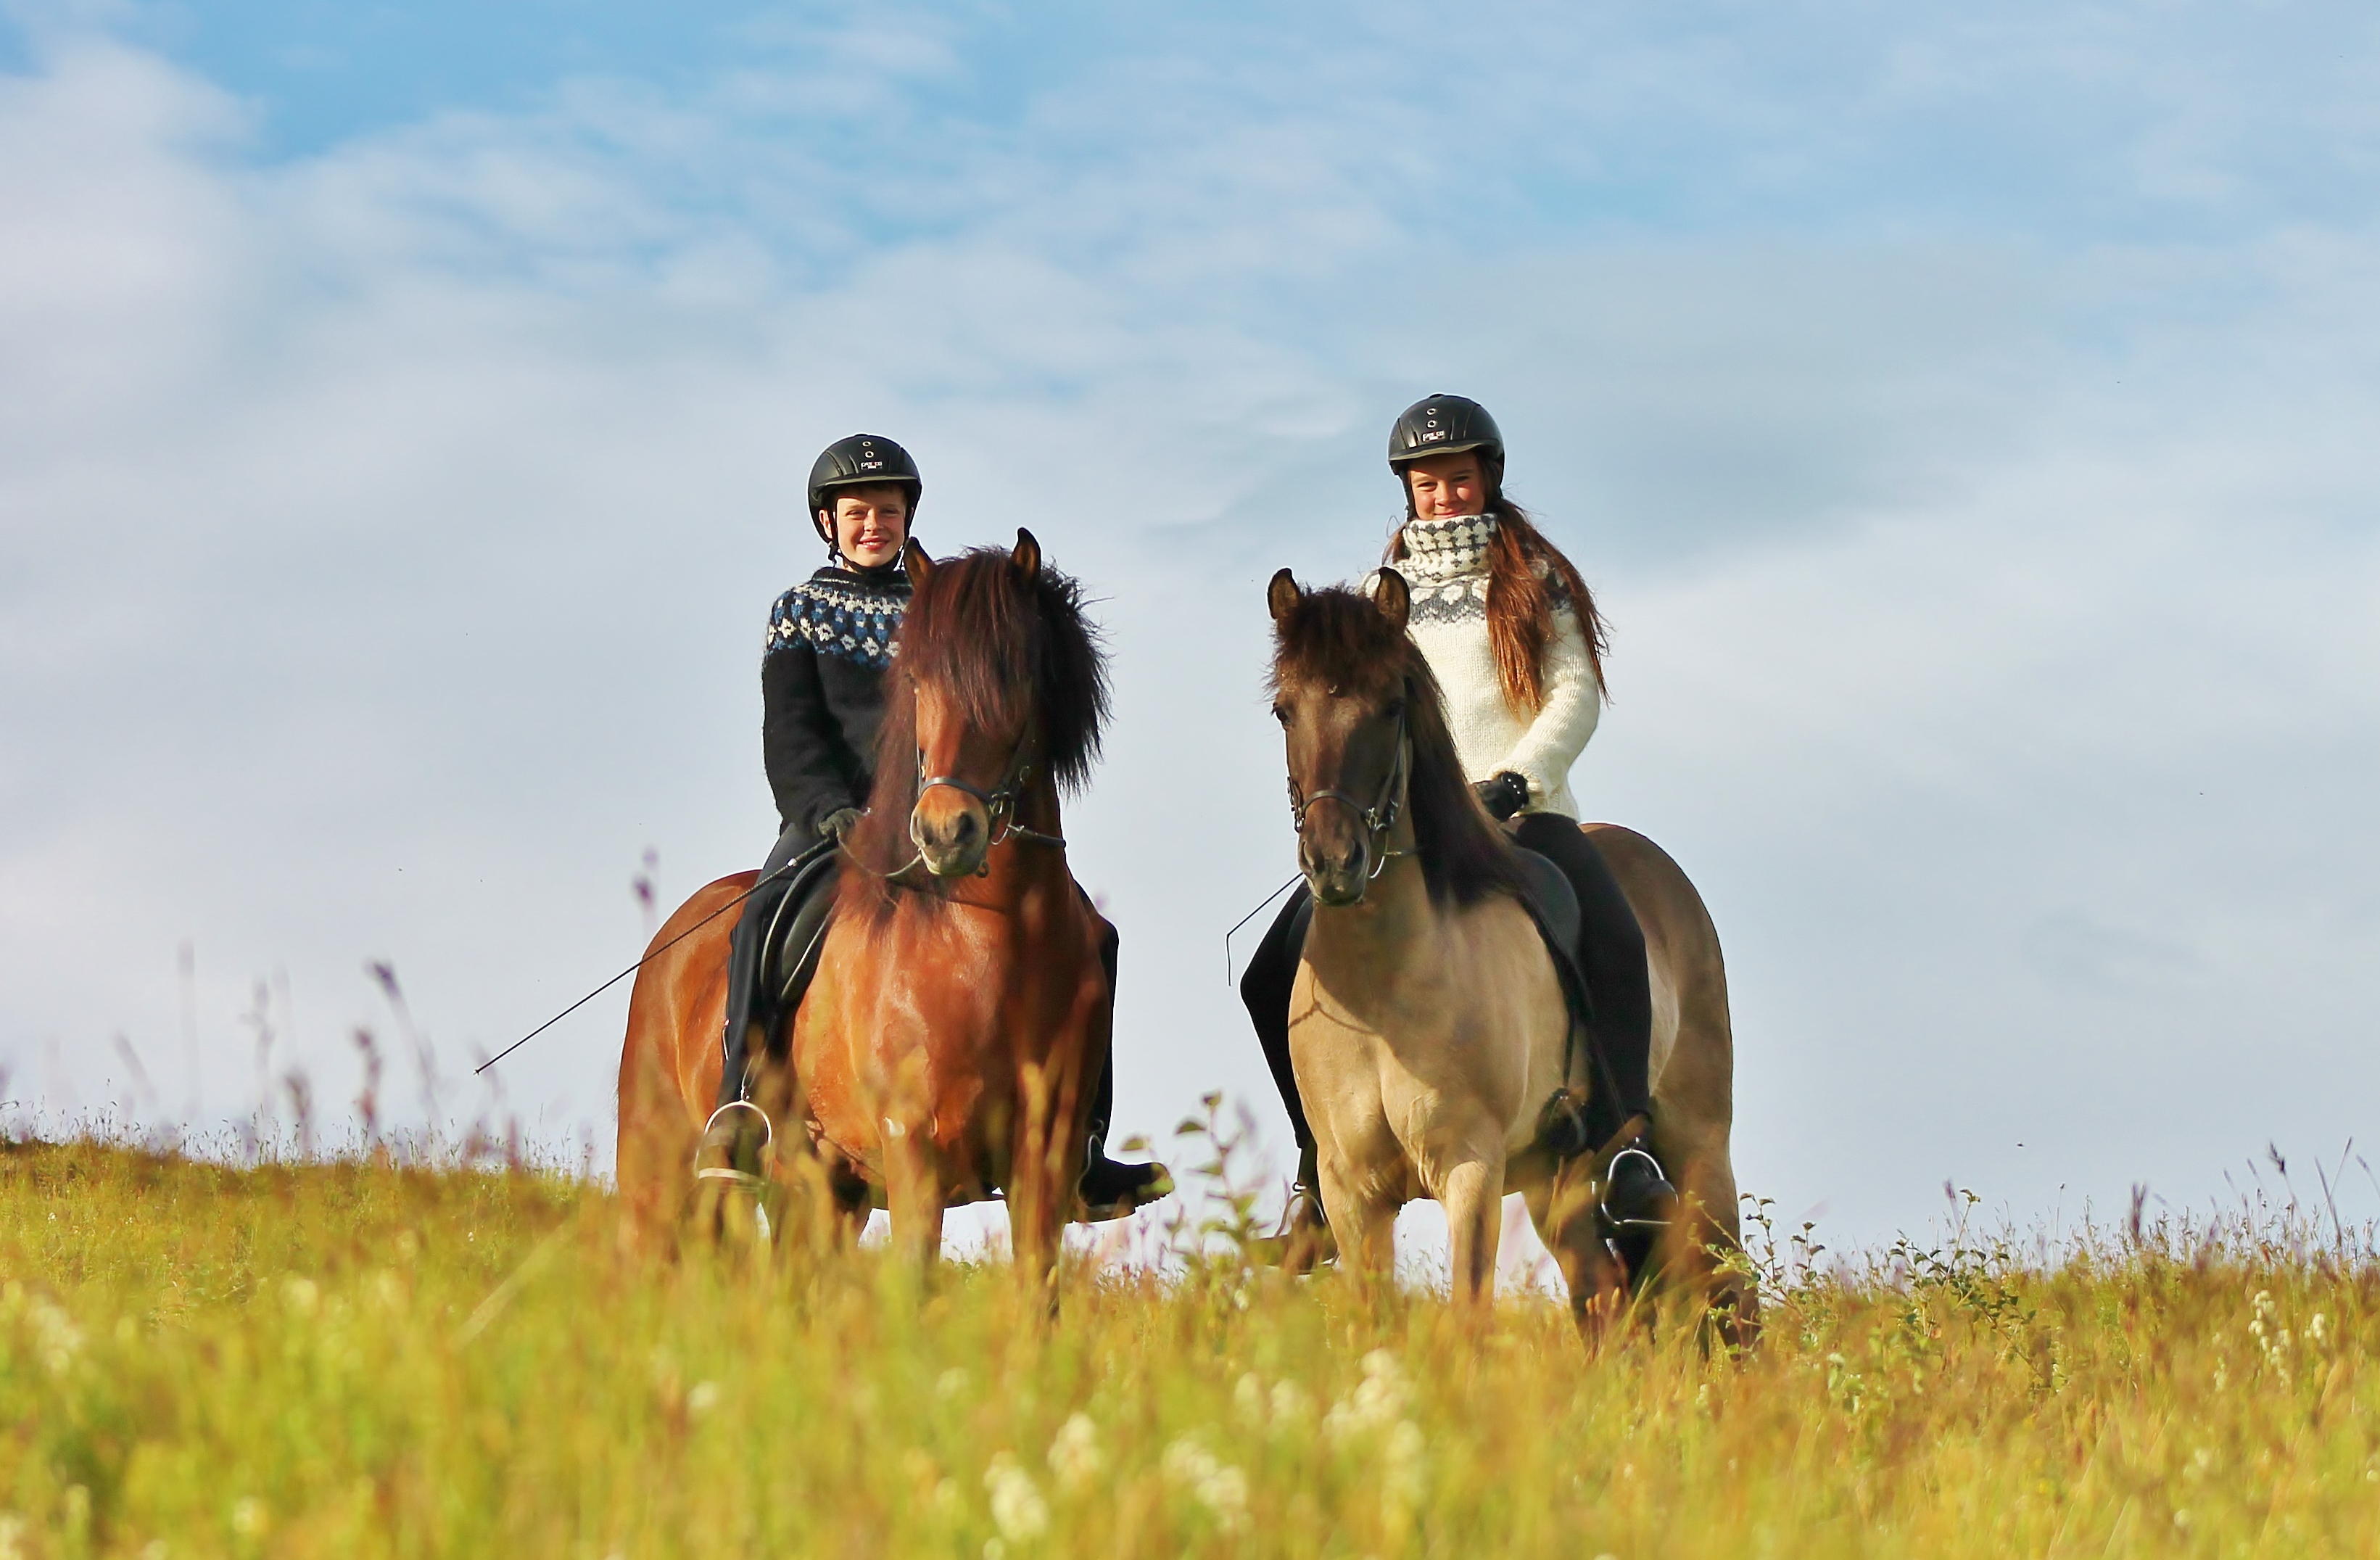 Riding in Harmony – Photo competition